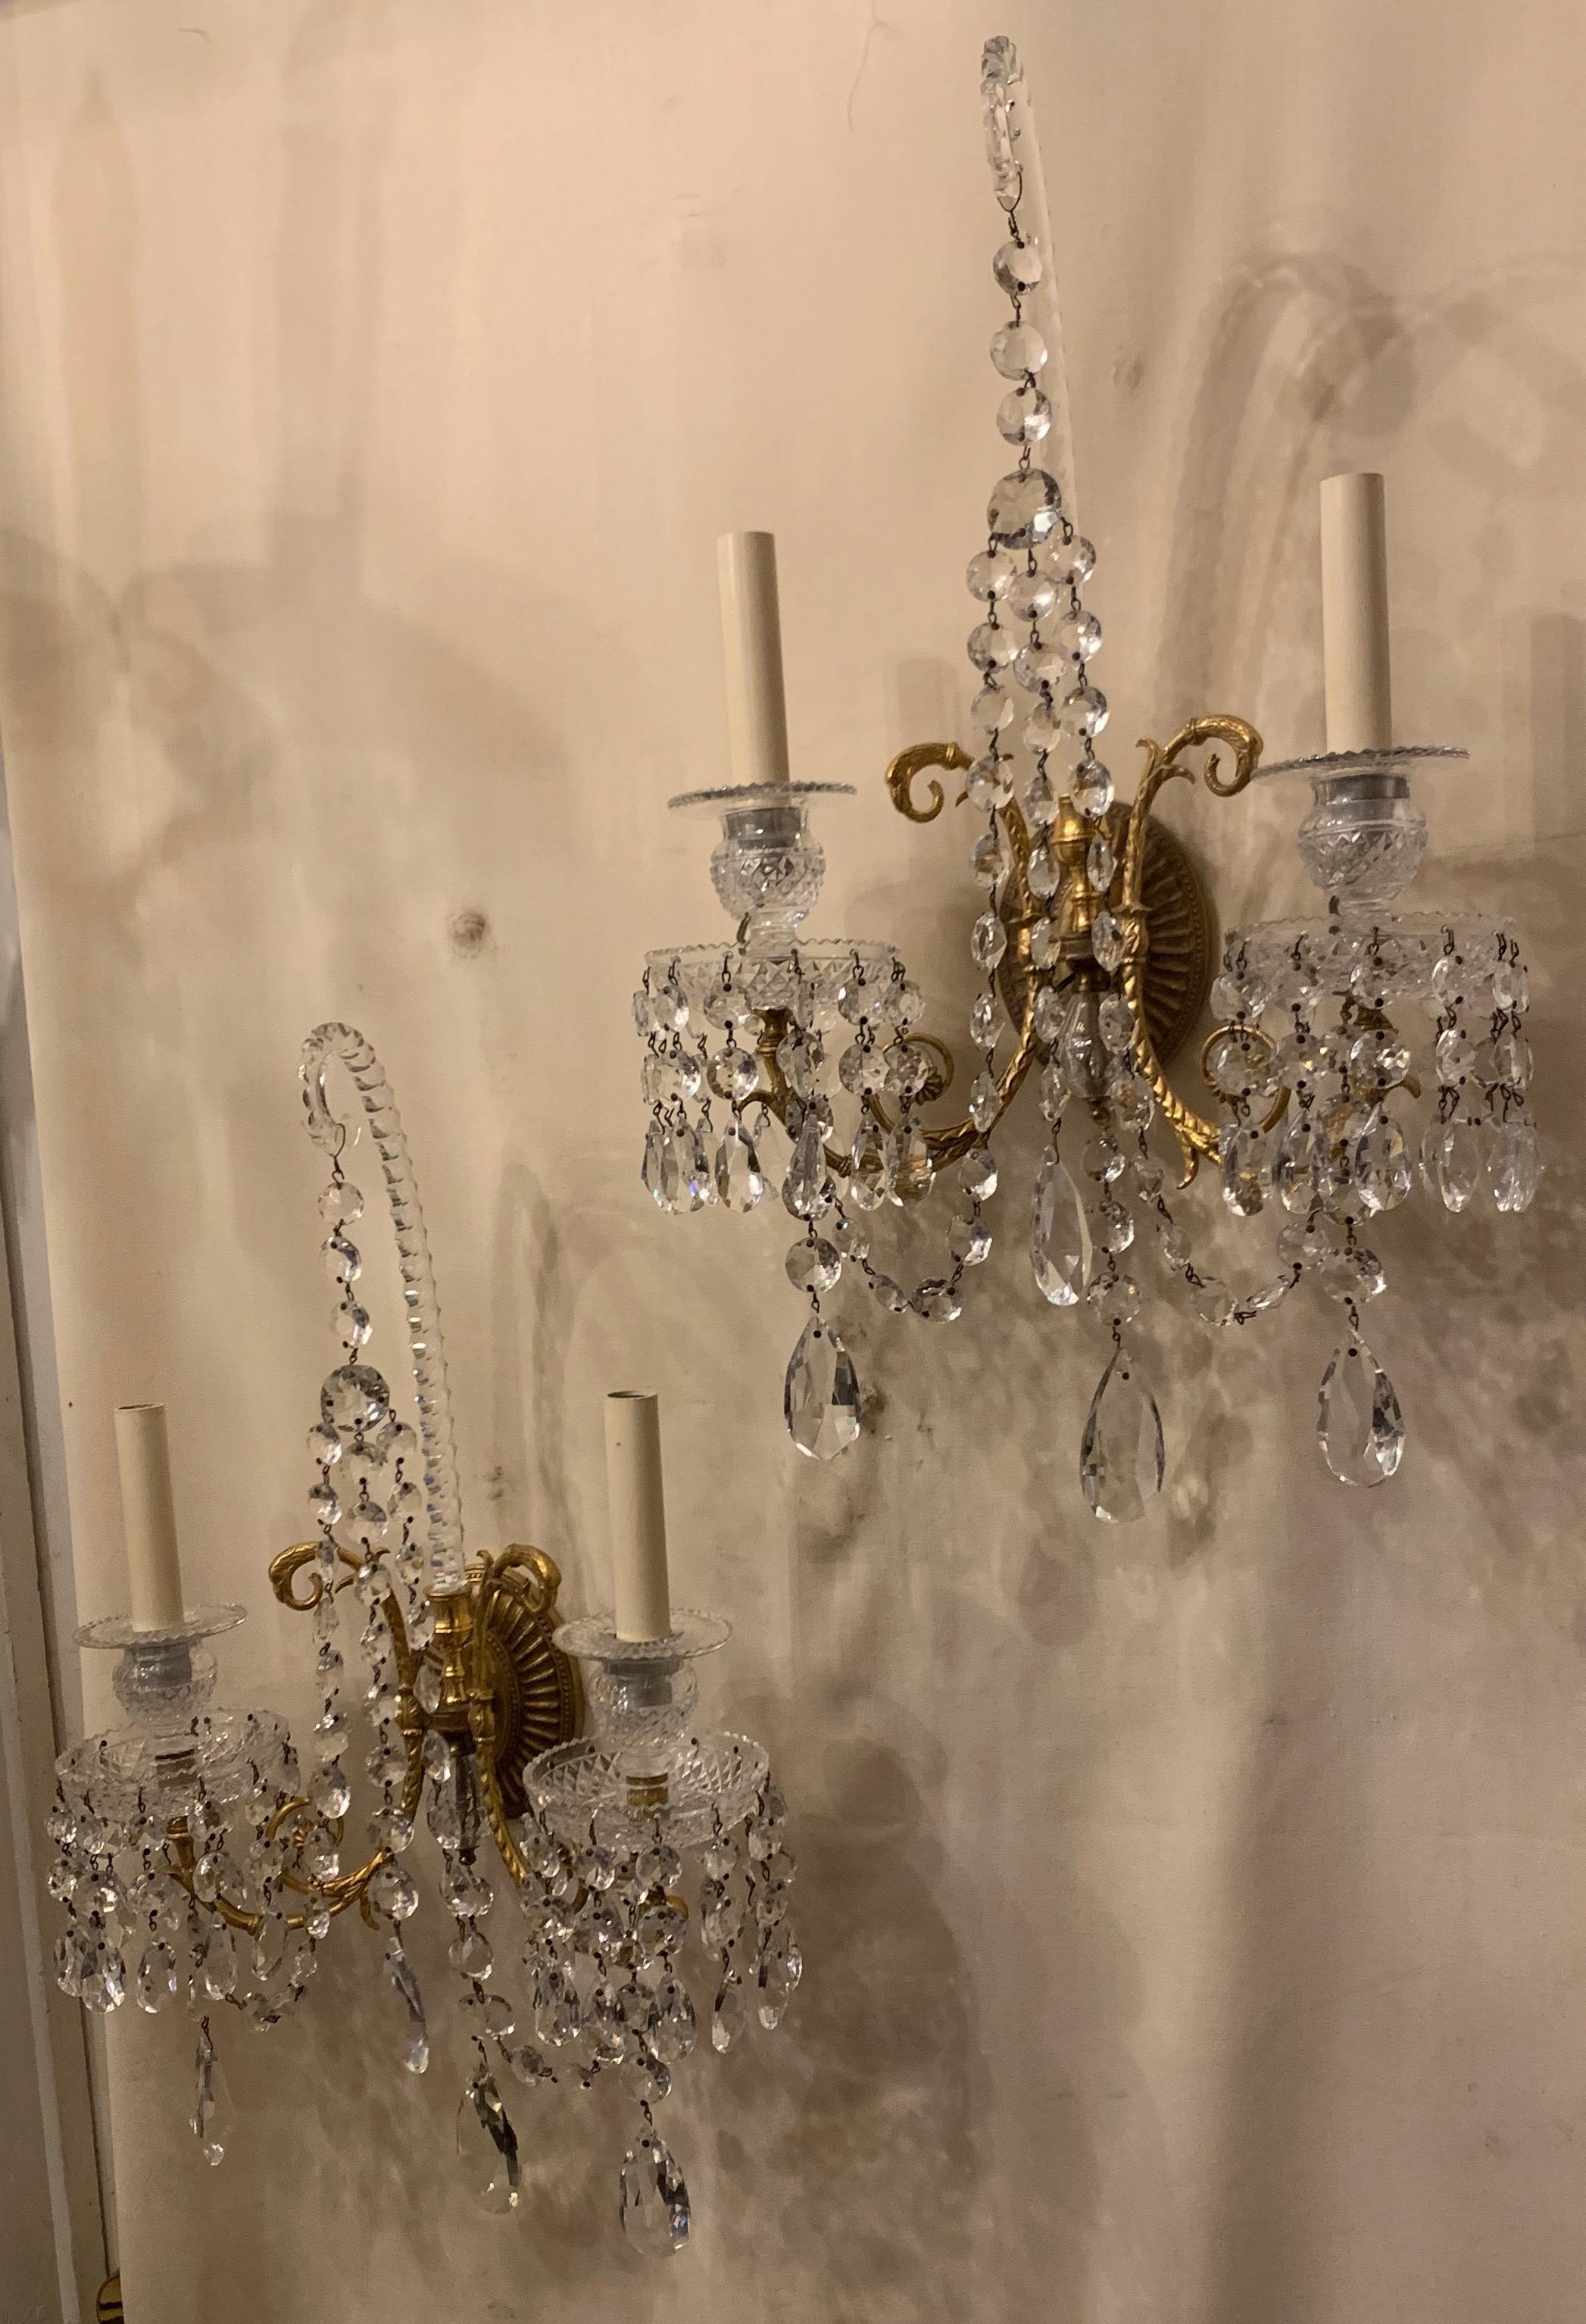 Wonderful pair of French doré bronze and crystal neoclassical, Regency, Empire two-light candelabra sconces
Rewired and ready to enjoy.